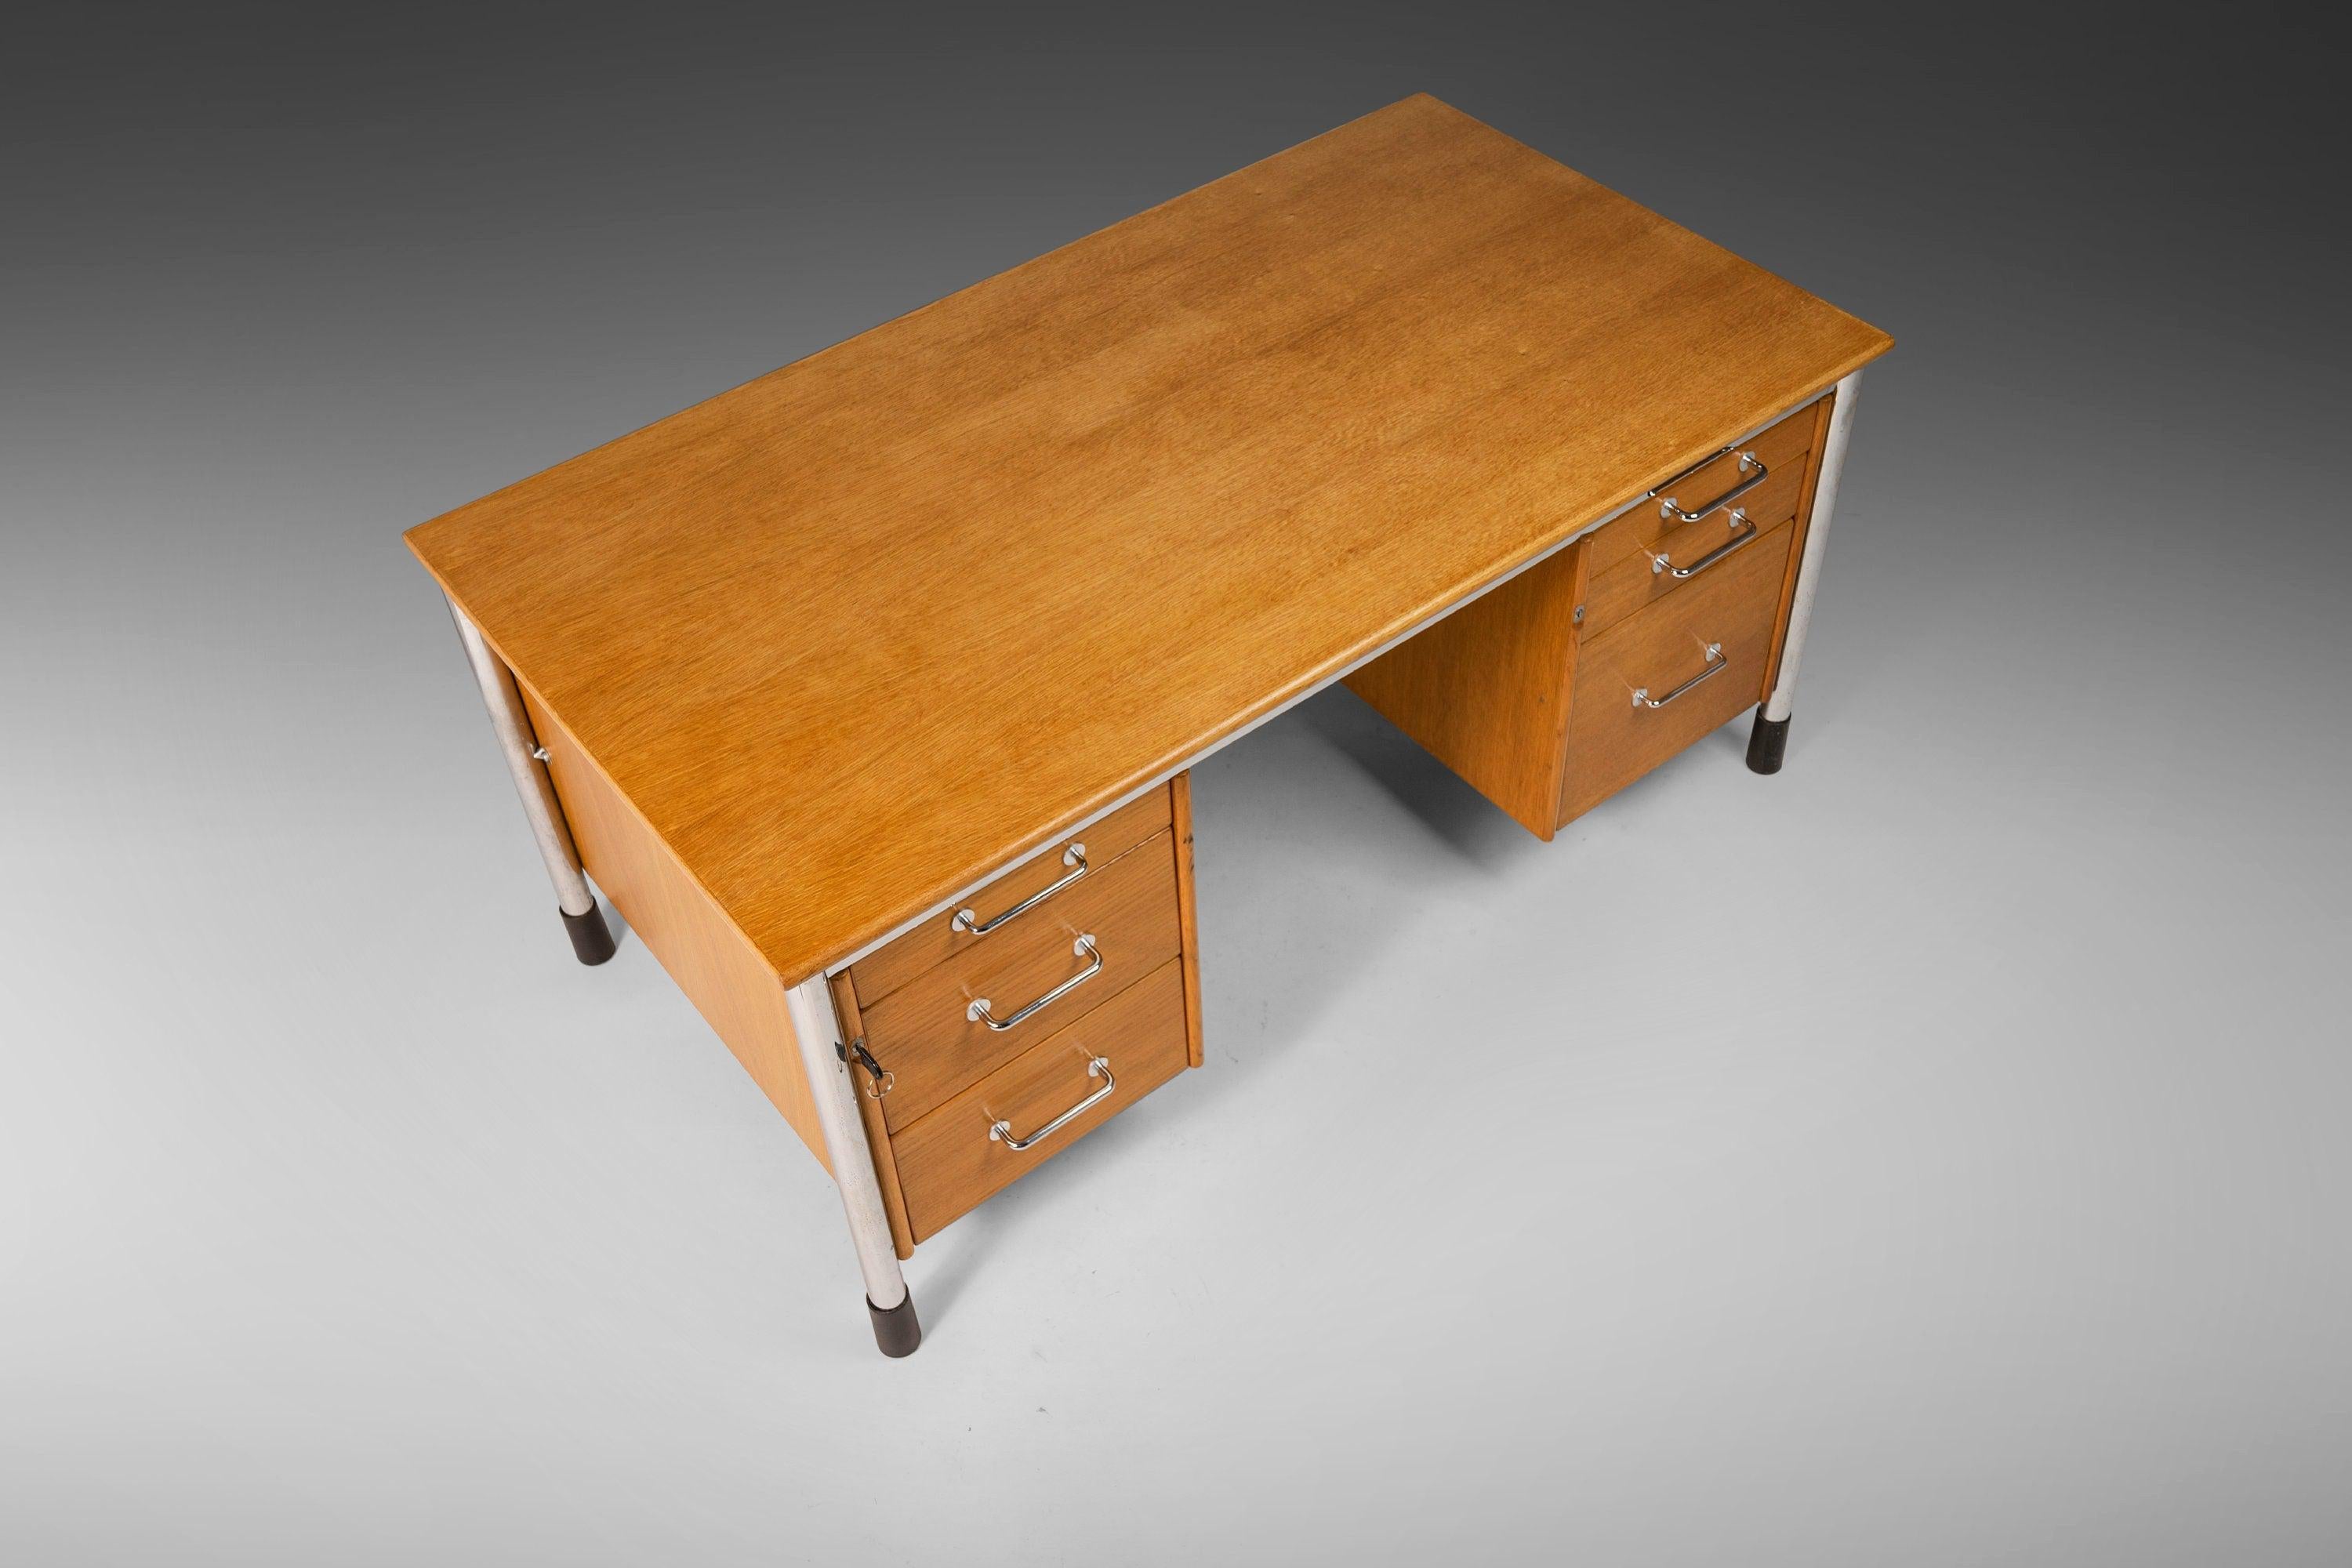 Signatur Executive Desk by Tord Bjorklund in Oak and Chrome, Sweden, c. 1980 In Good Condition For Sale In Deland, FL